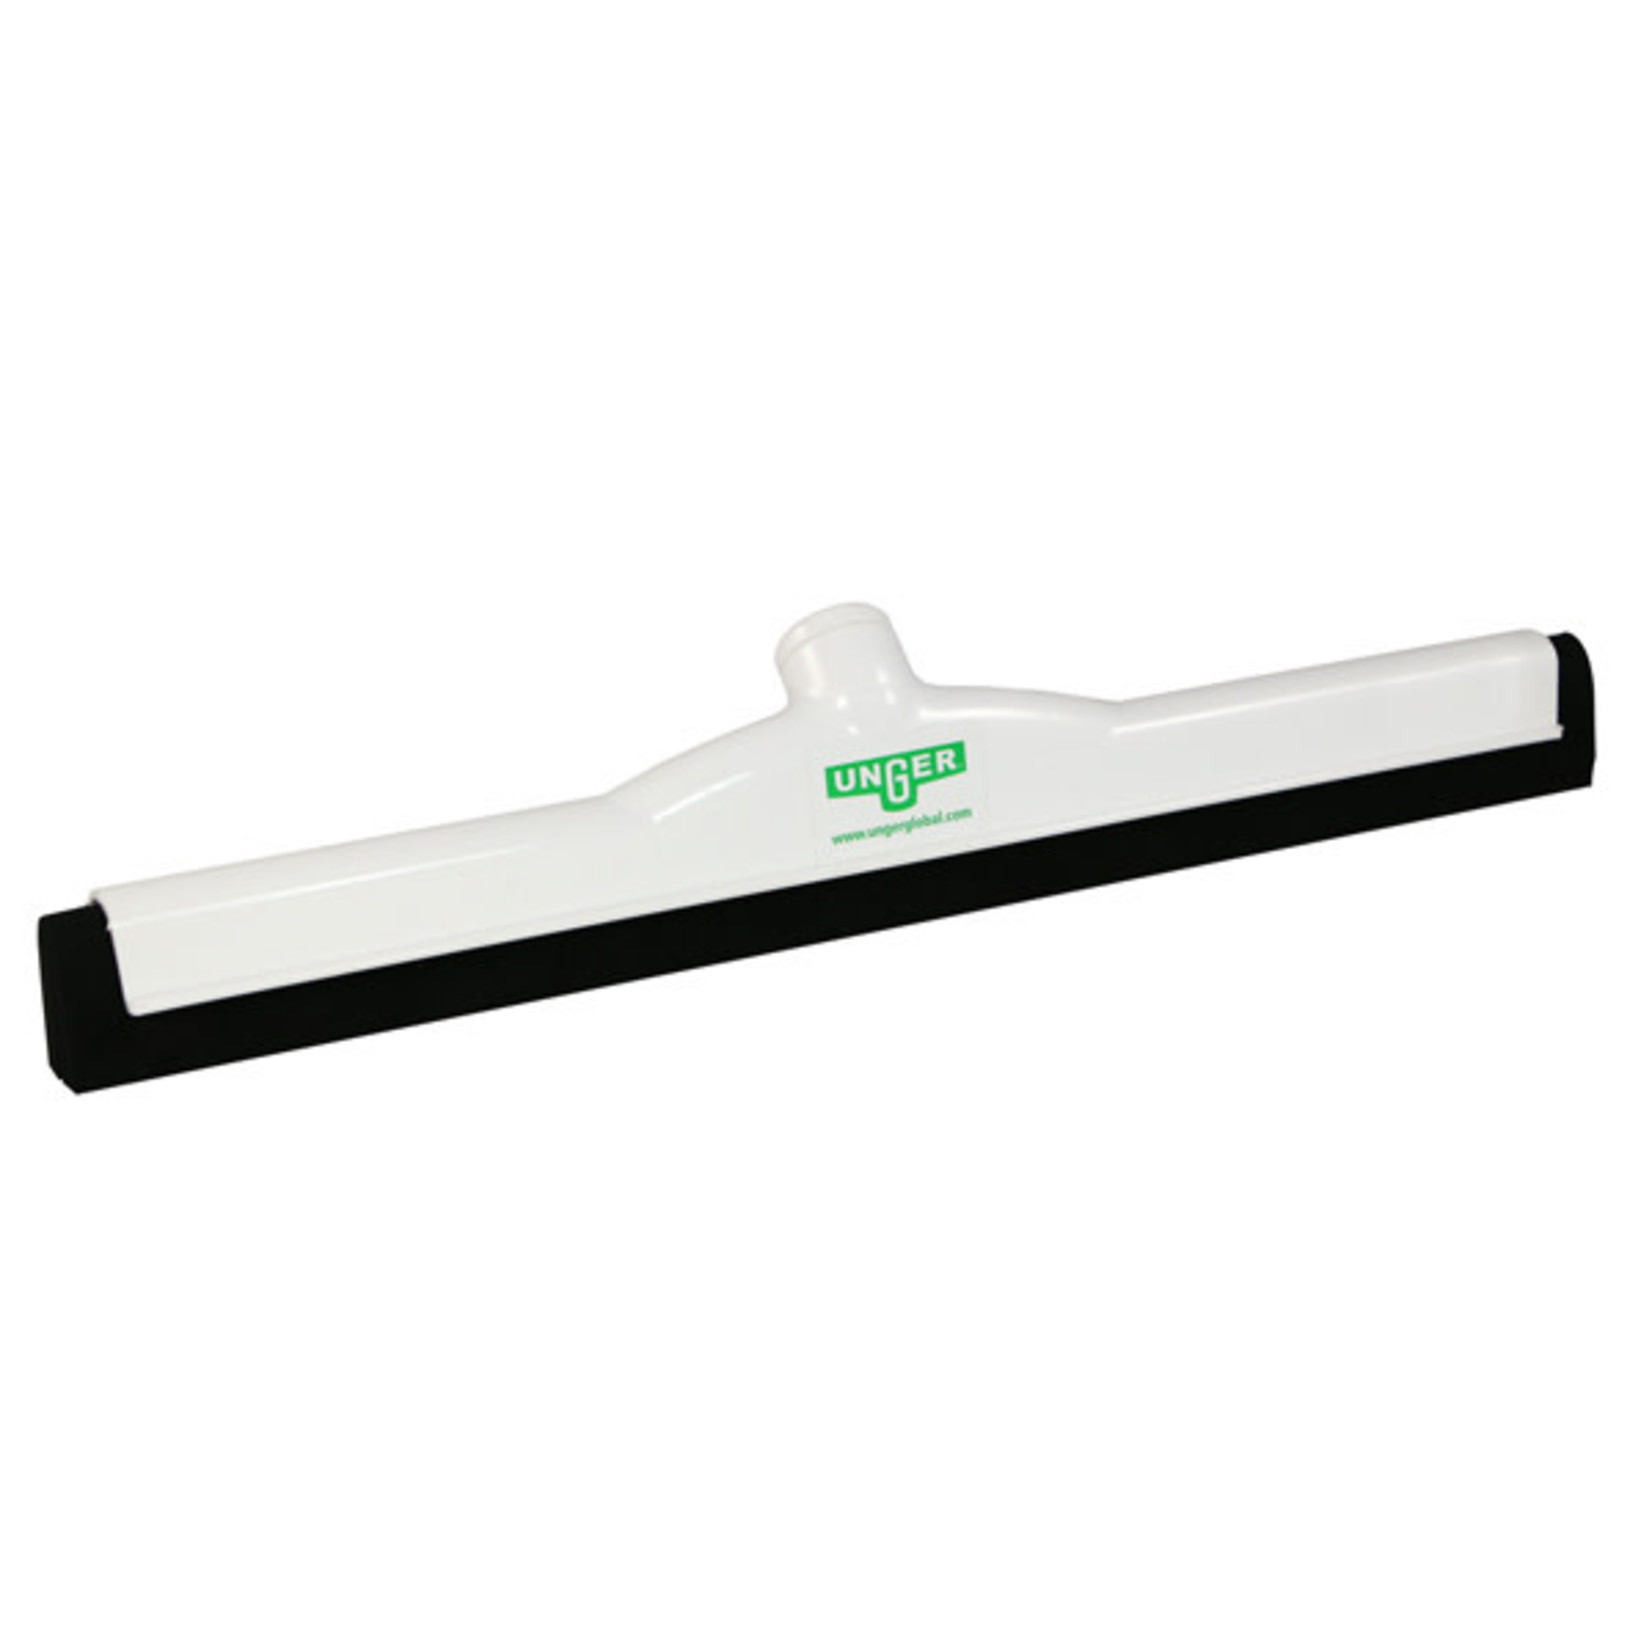 Unger sSanitary Standard Floor Squeegees 22 in